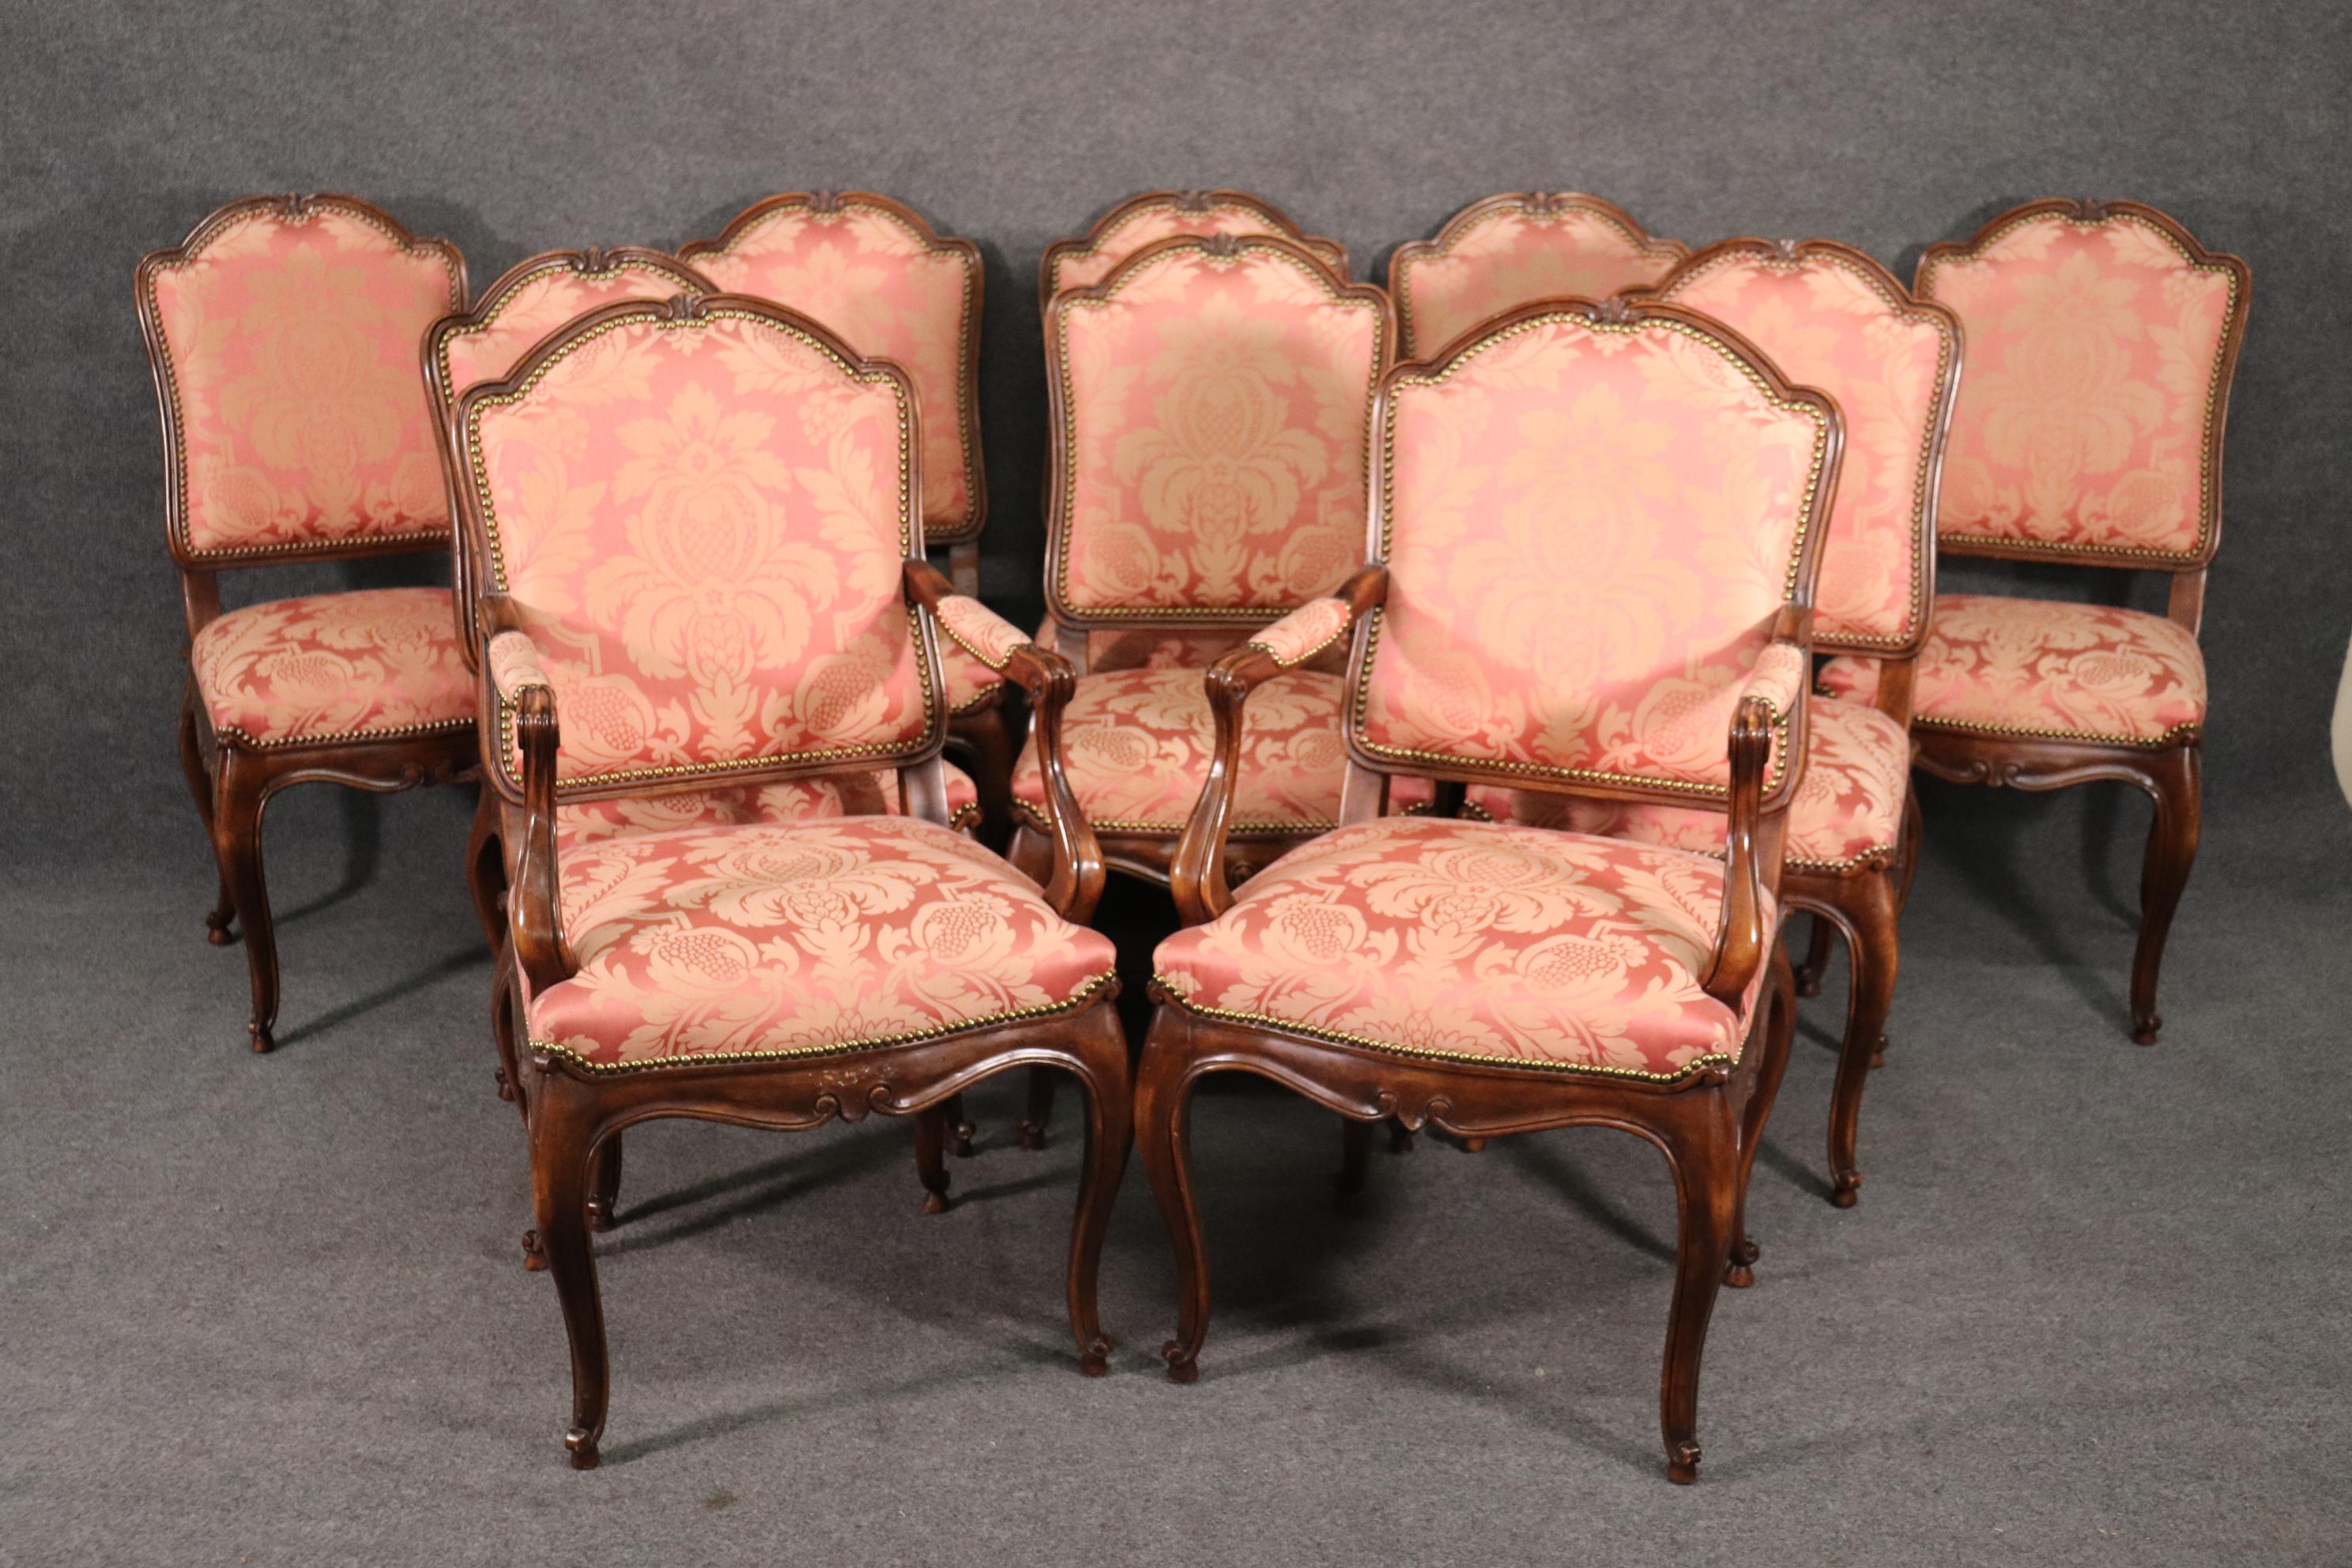 This is a fantastic set of 10 beautifully upholstered and trimmed in nailheads. The frames are beautiful quality with nice precise carving. The blush pink damask upholstery may be silk but I can't say with absolute certainty but its clean and still